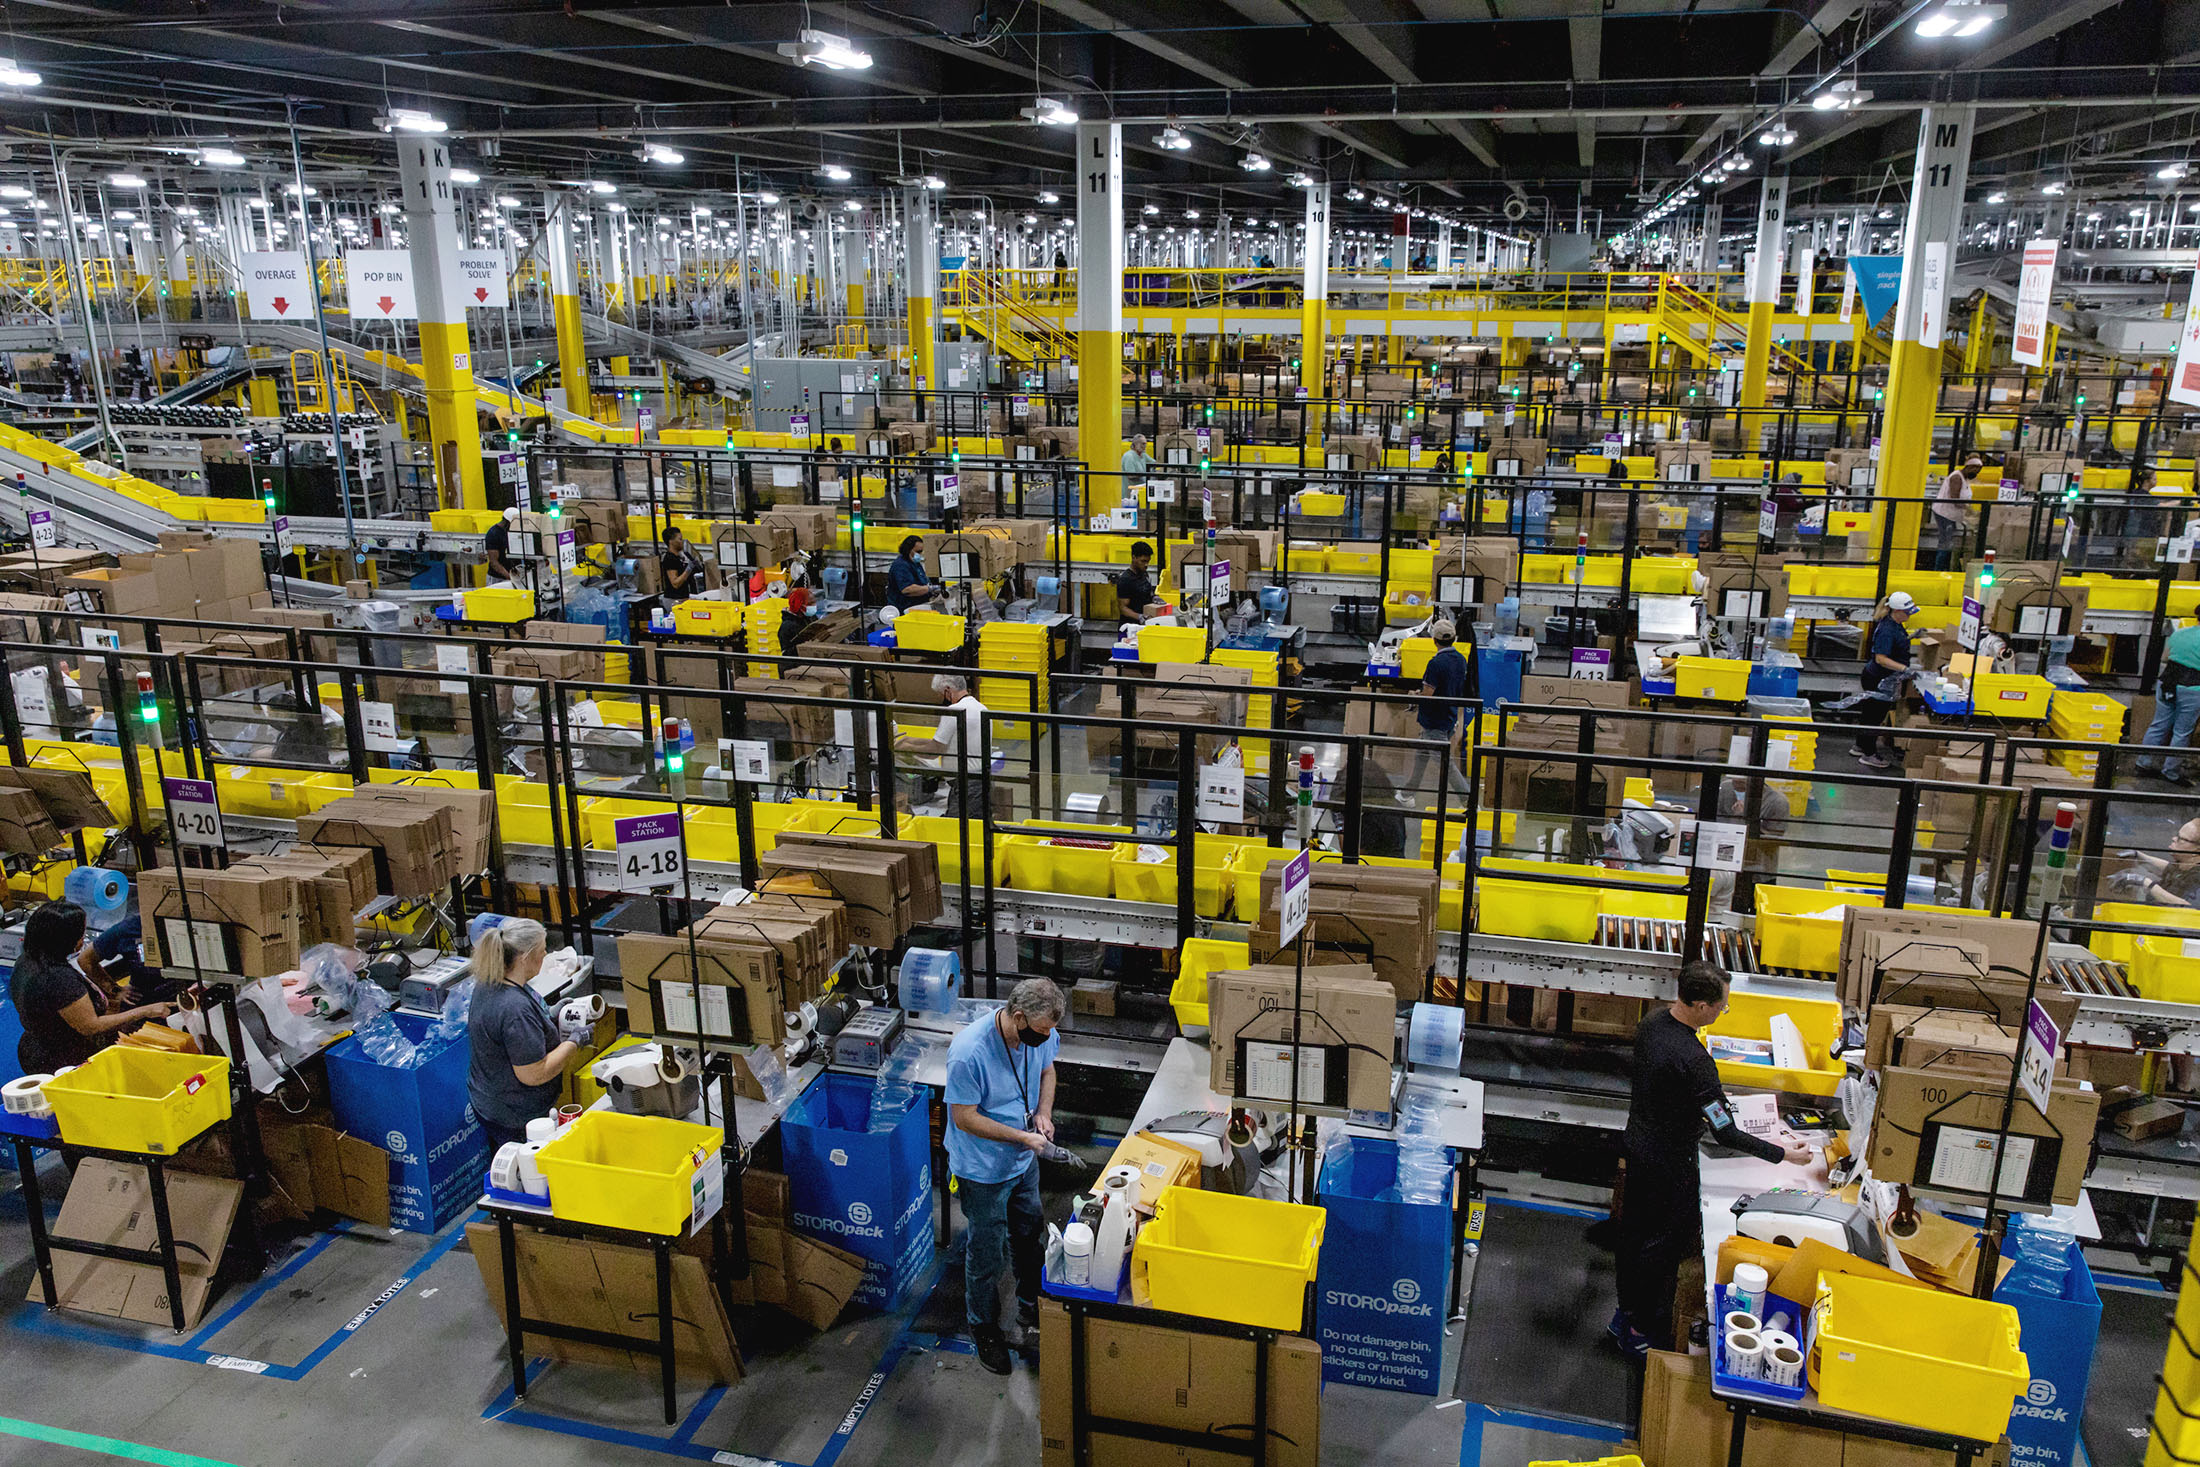 Amazon Closes, Abandons Plans for Dozens of Warehouses Across the US